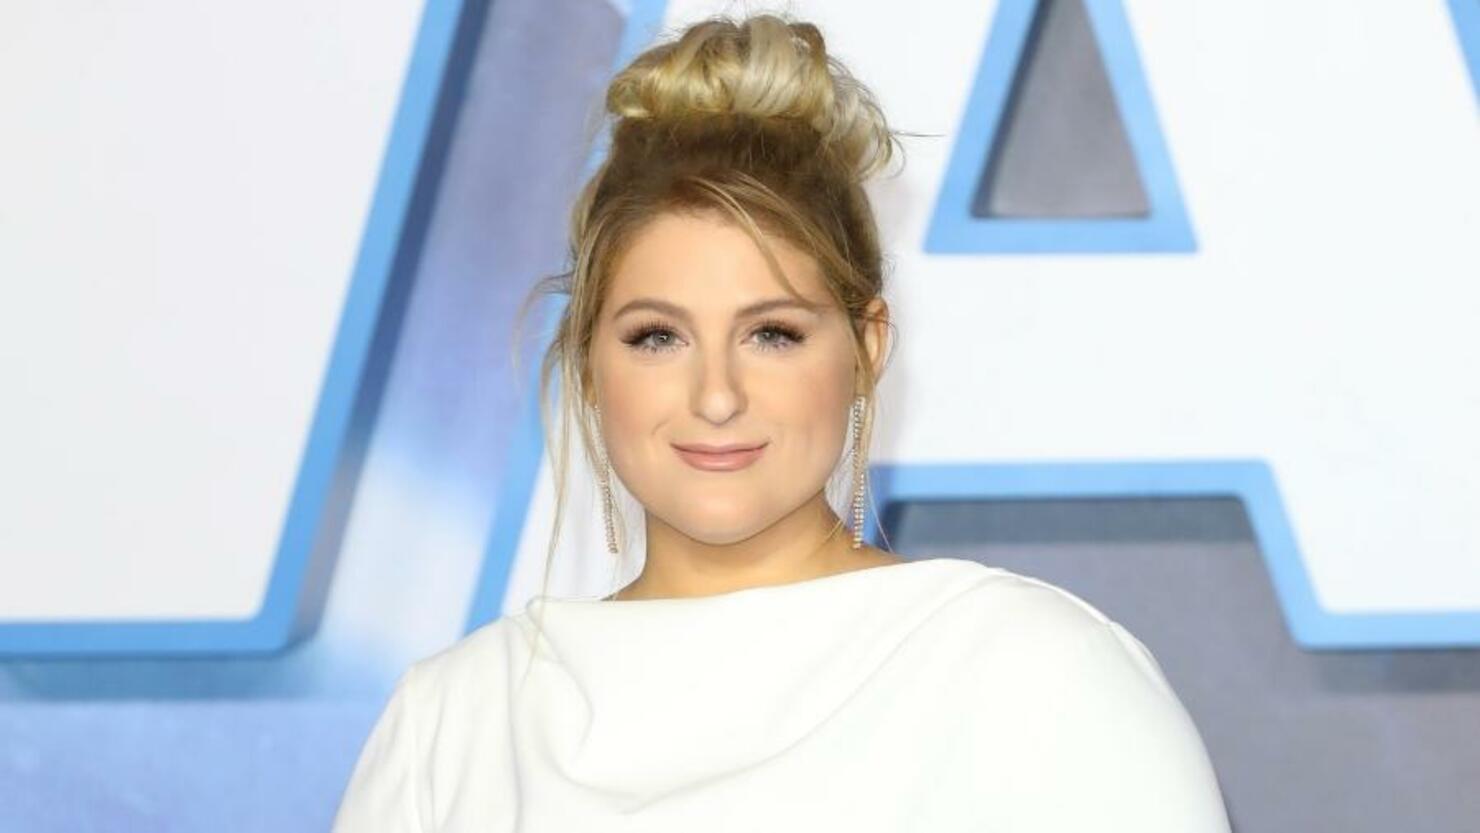 Meghan Trainor Shares She Lost 60 Lbs. After Being in a “Dark Place”